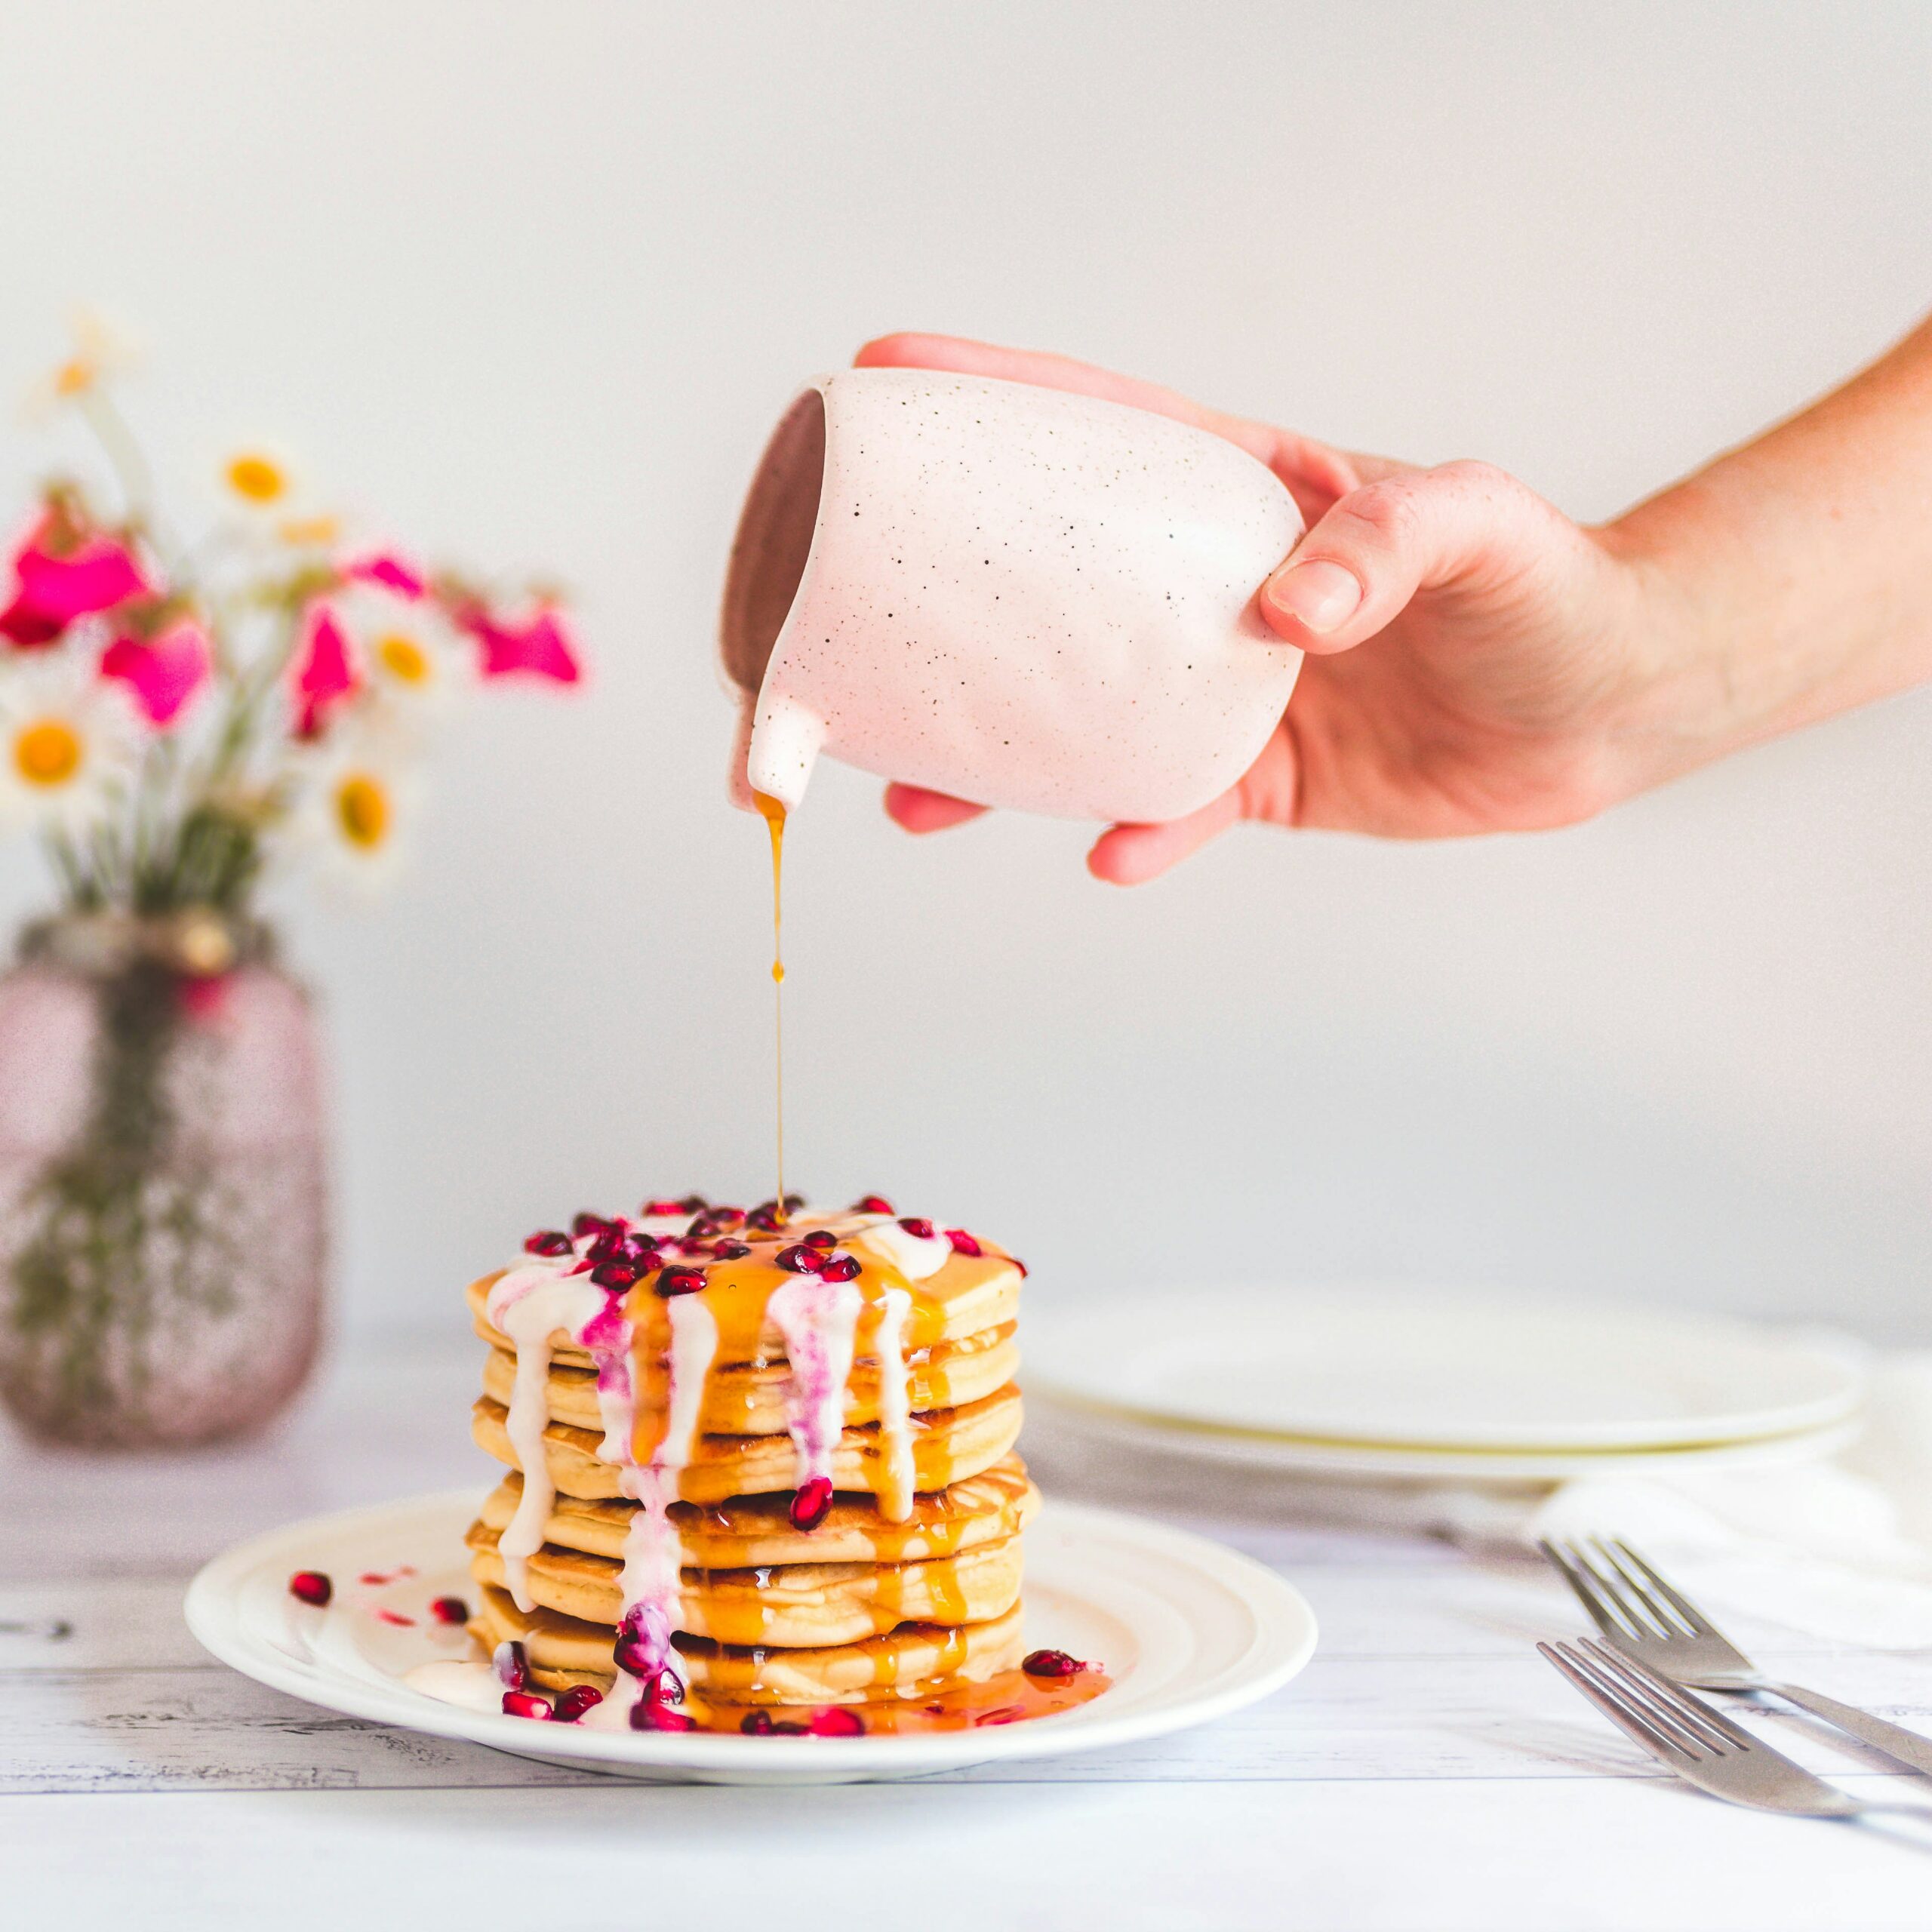 A pink ceramic pot is pouring maple syrup onto a stack of golden pancakes on a white plate. A bouquet of pink, white and yellow flowers is in the background.